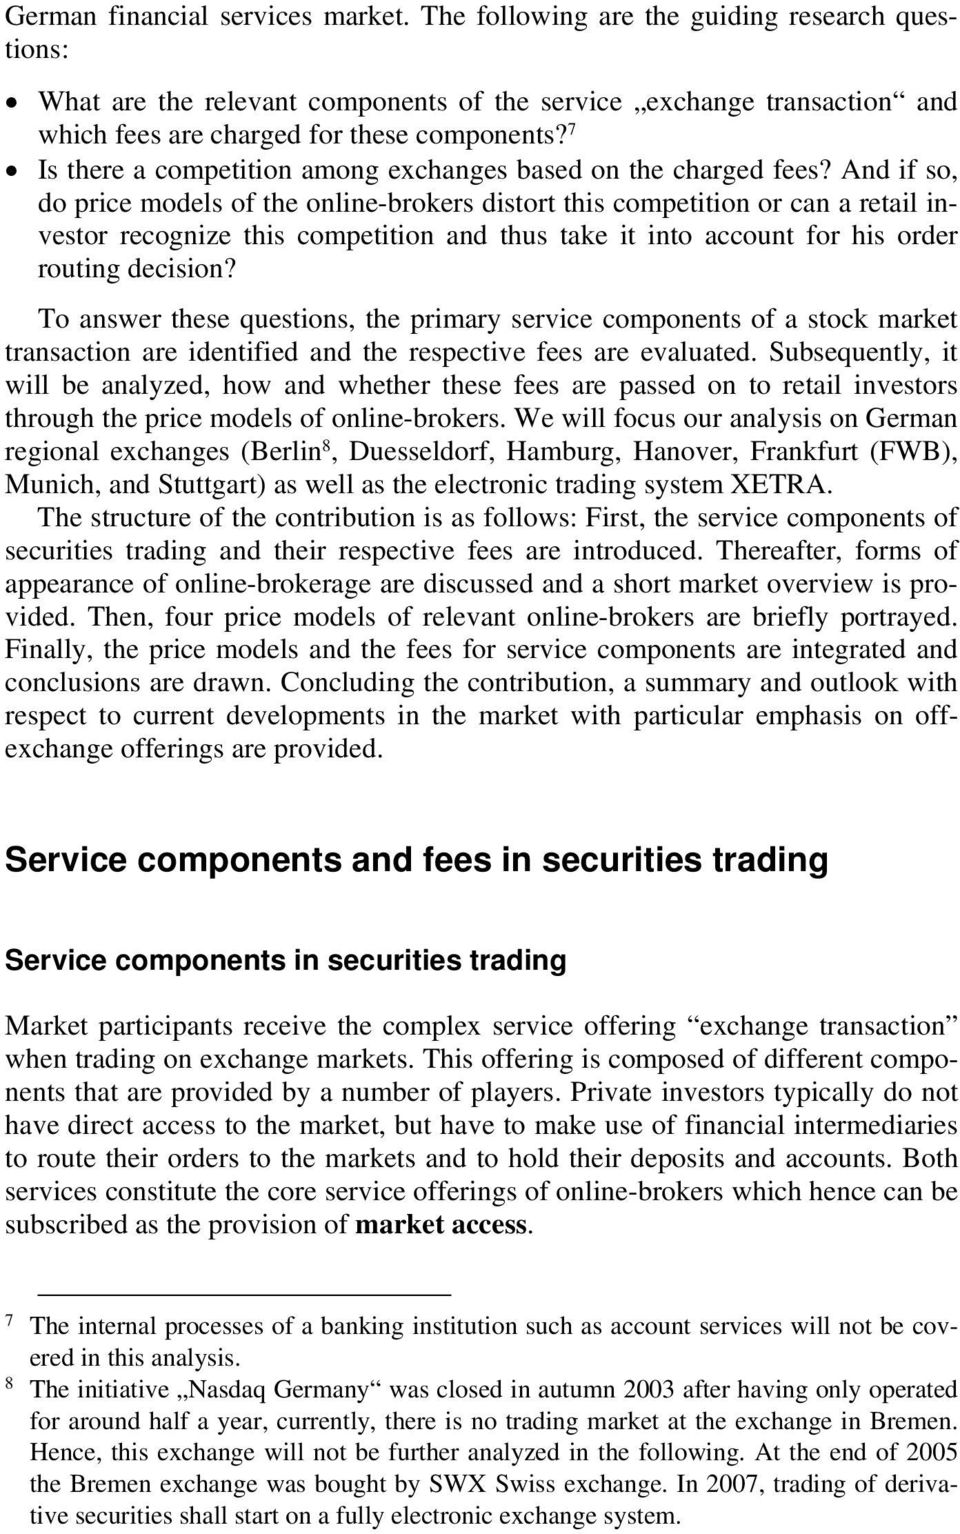 7 Is there a competition among exchanges based on the charged fees?